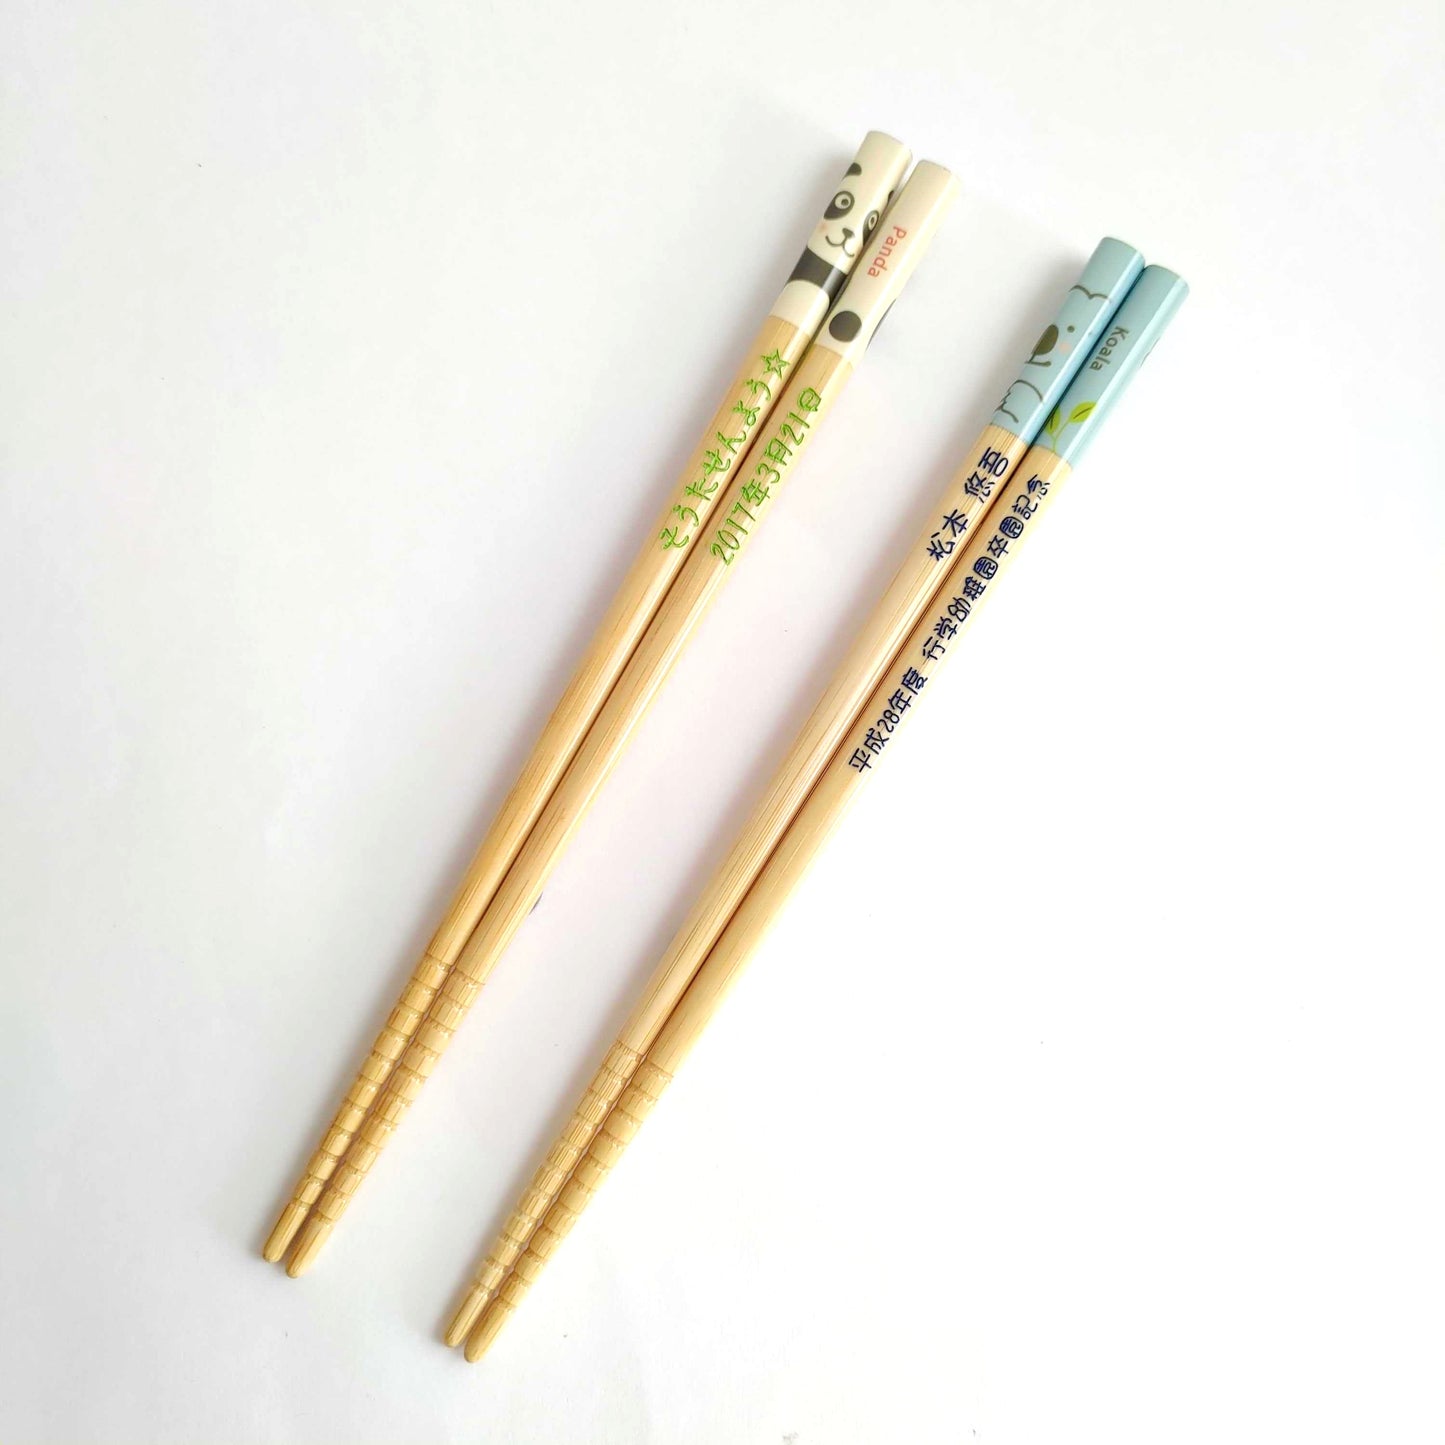 Cute Japanese chopsticks for kids with animals design - SINGLE PAIR